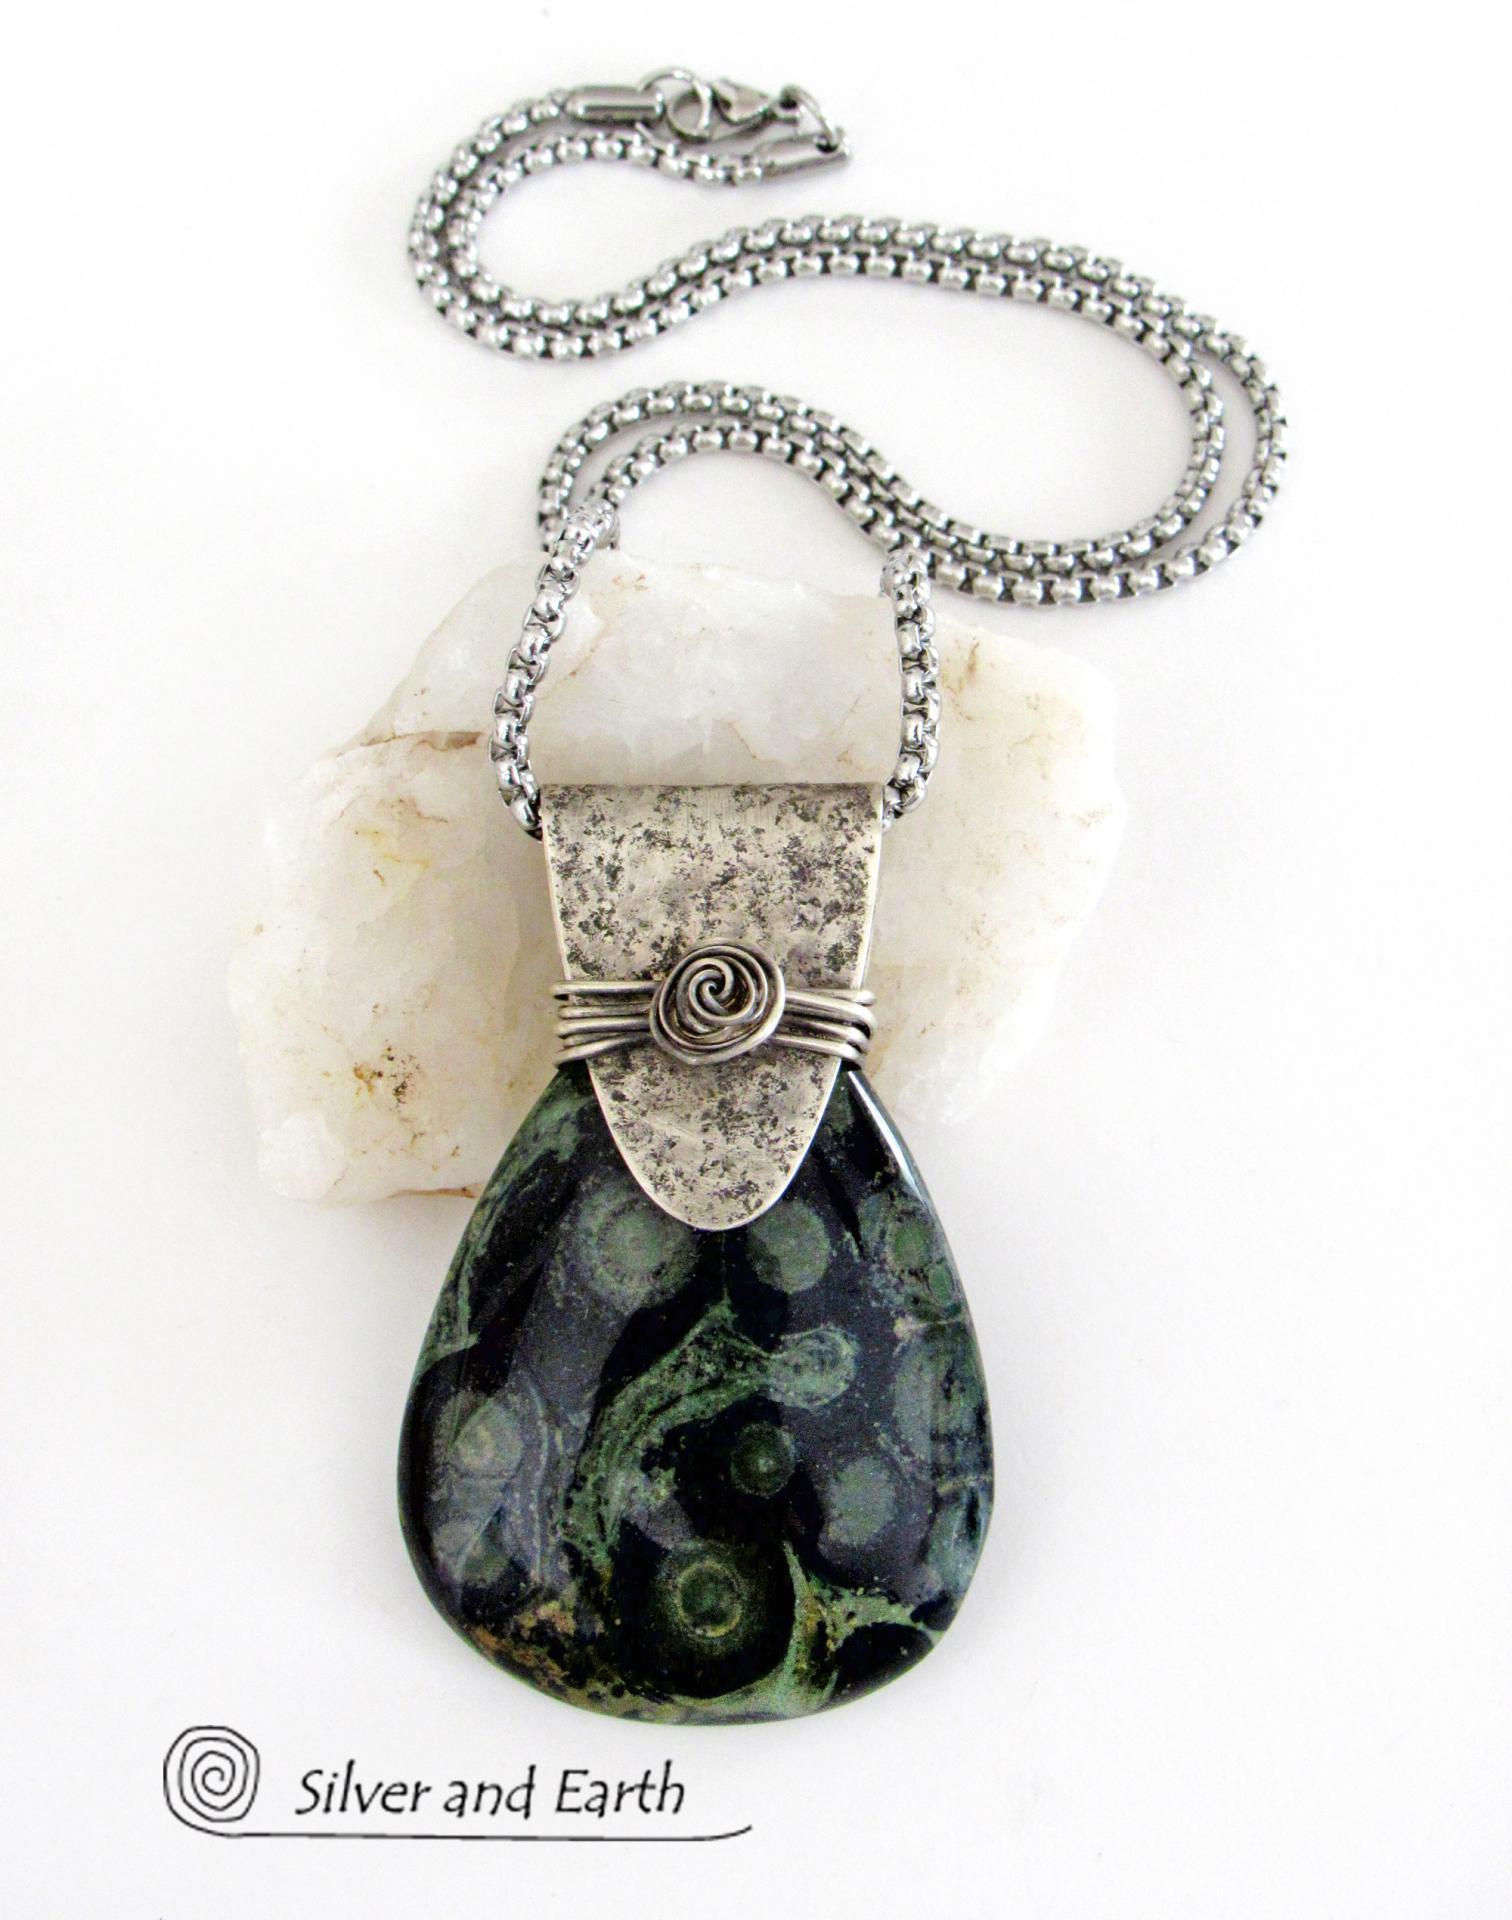 Kambaba Jasper Sterling Silver Necklace - Unique One of a Kind Natural Stone Jewelry